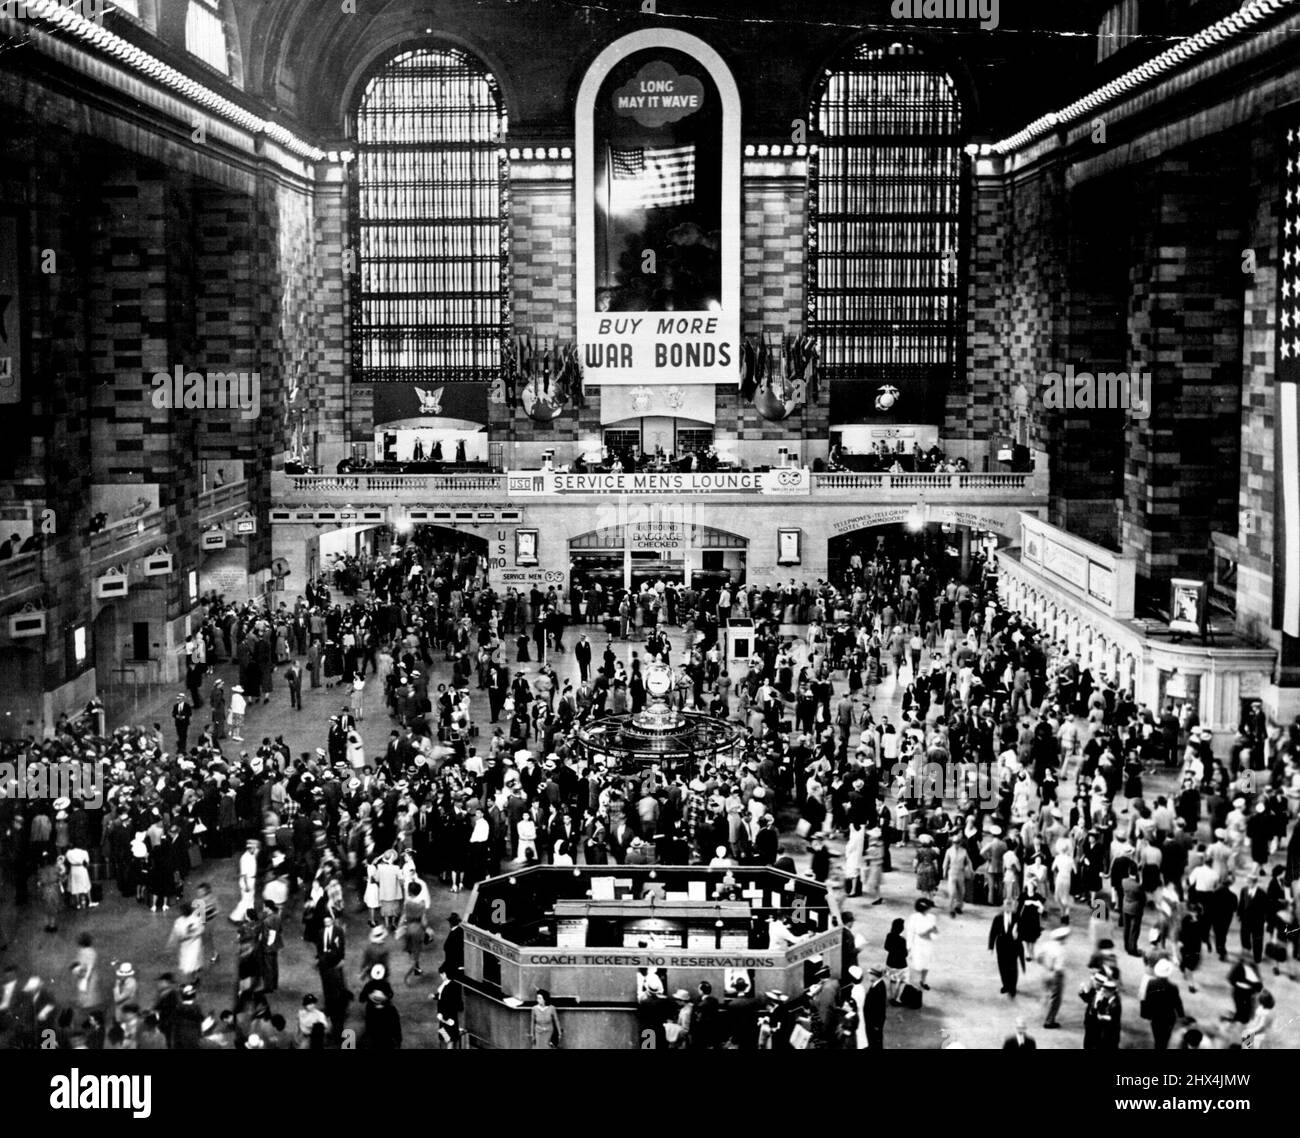 The main concourse of New York's Grand Central Station. More than 3,000 underground railway passengers fought their way to safety through acrid, choking smoke today after fire broke out in a tunnel near New York's Grand Central Station. Some passengers became hysterical and screamed in terror during a wait of more than one hour before rescuers- could start leading them out. November 28, 1949. Stock Photo